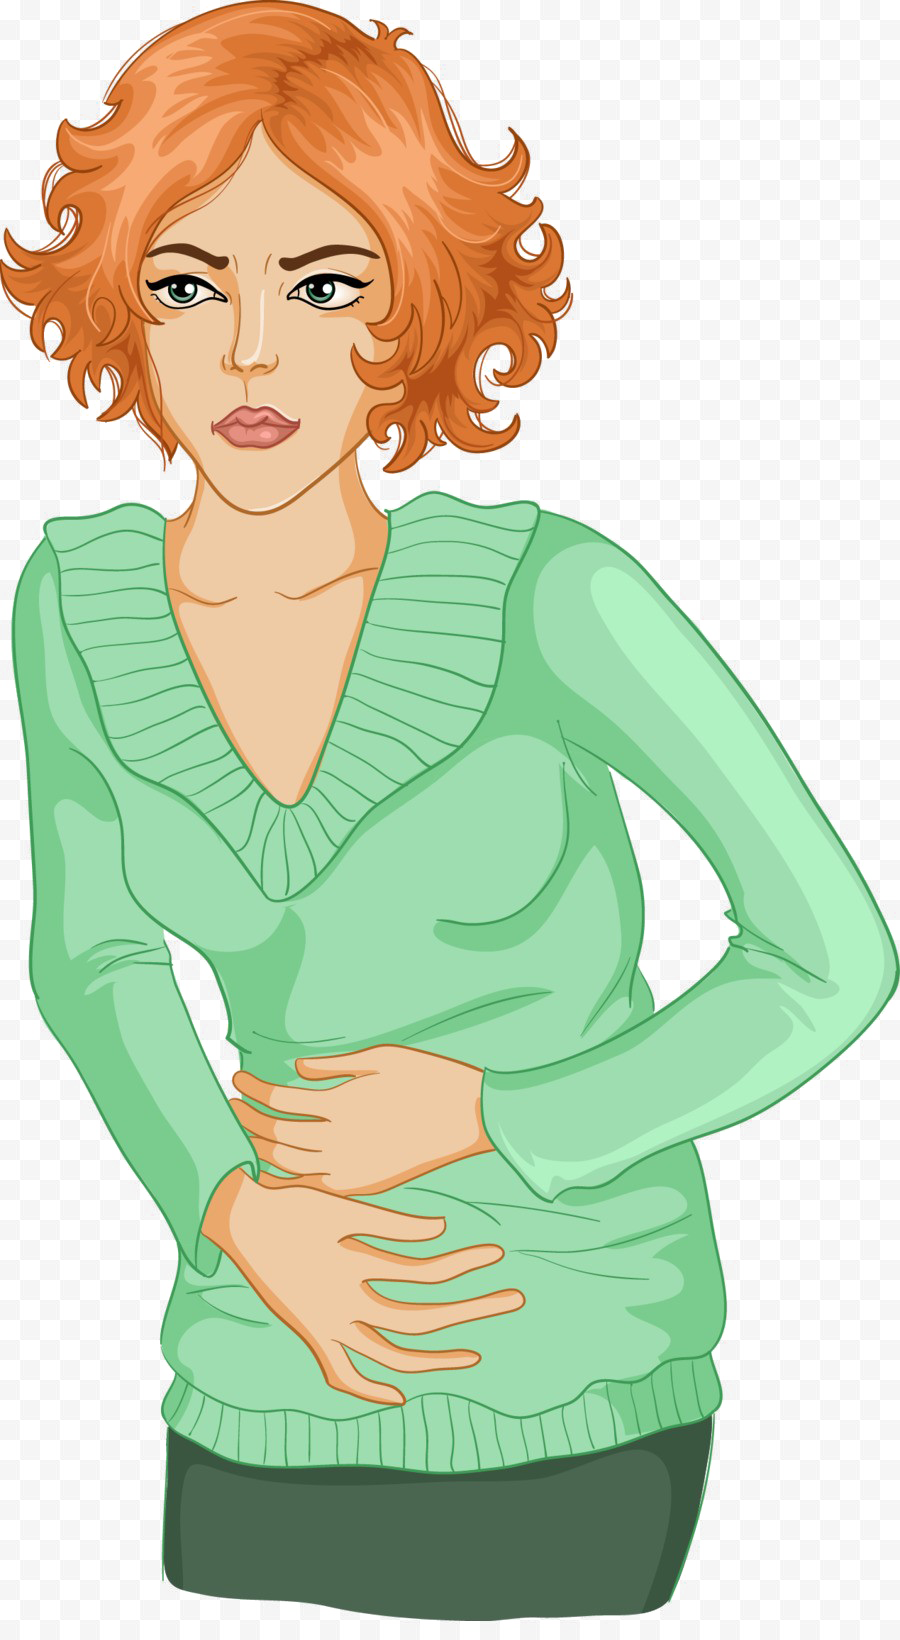 Pain In Stomach Transparent Background